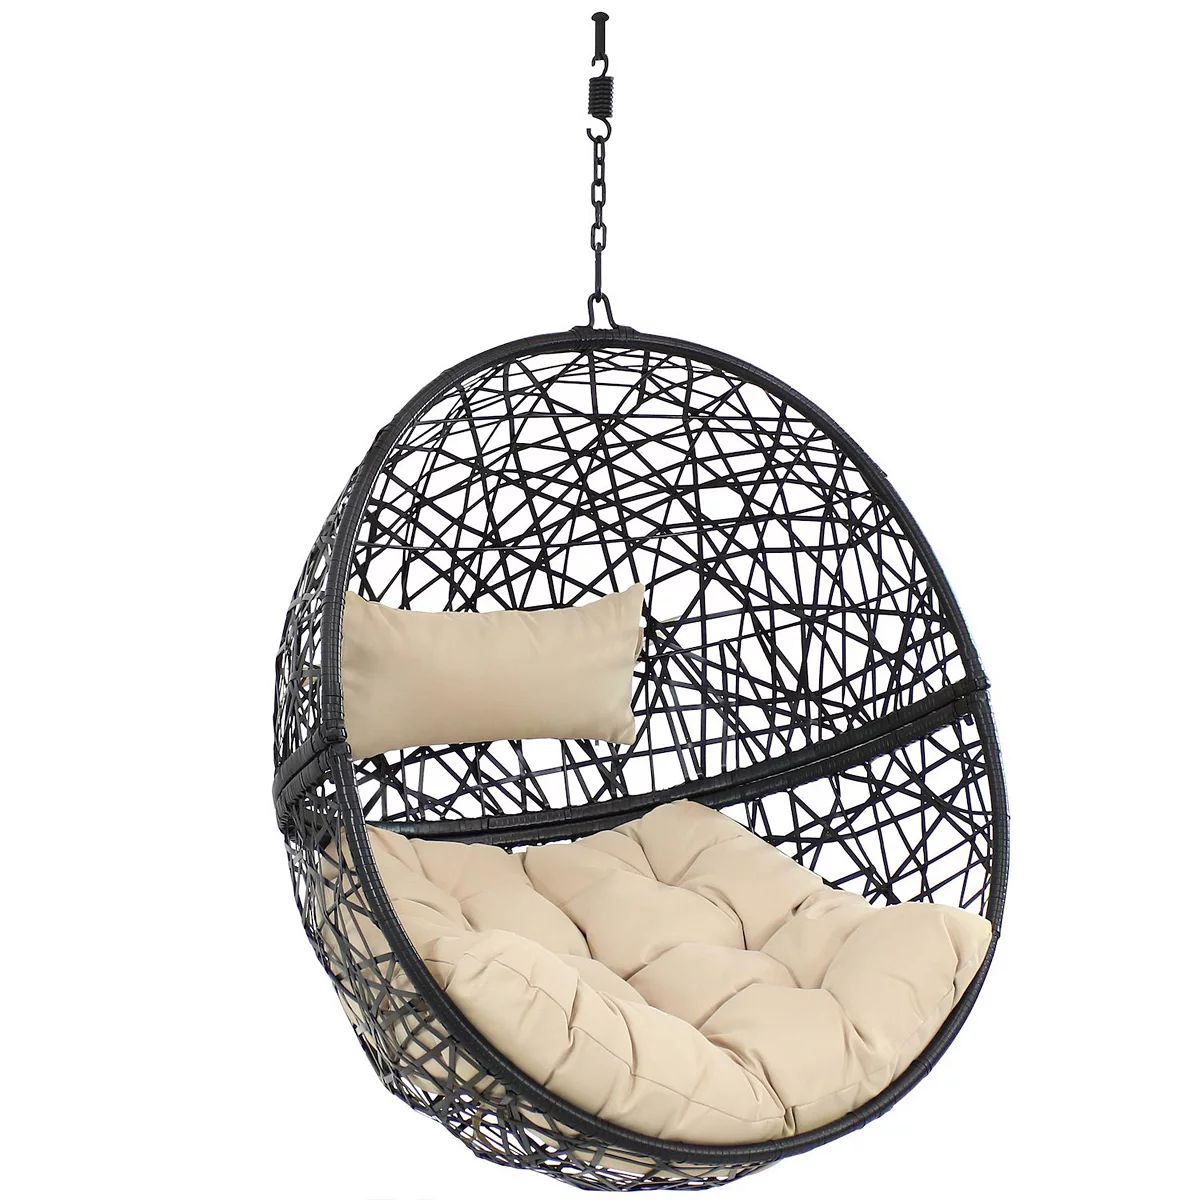 Sunnydaze Black Resin Wicker Round Hanging Egg Chair with Cushions - Yellow | Kohl's